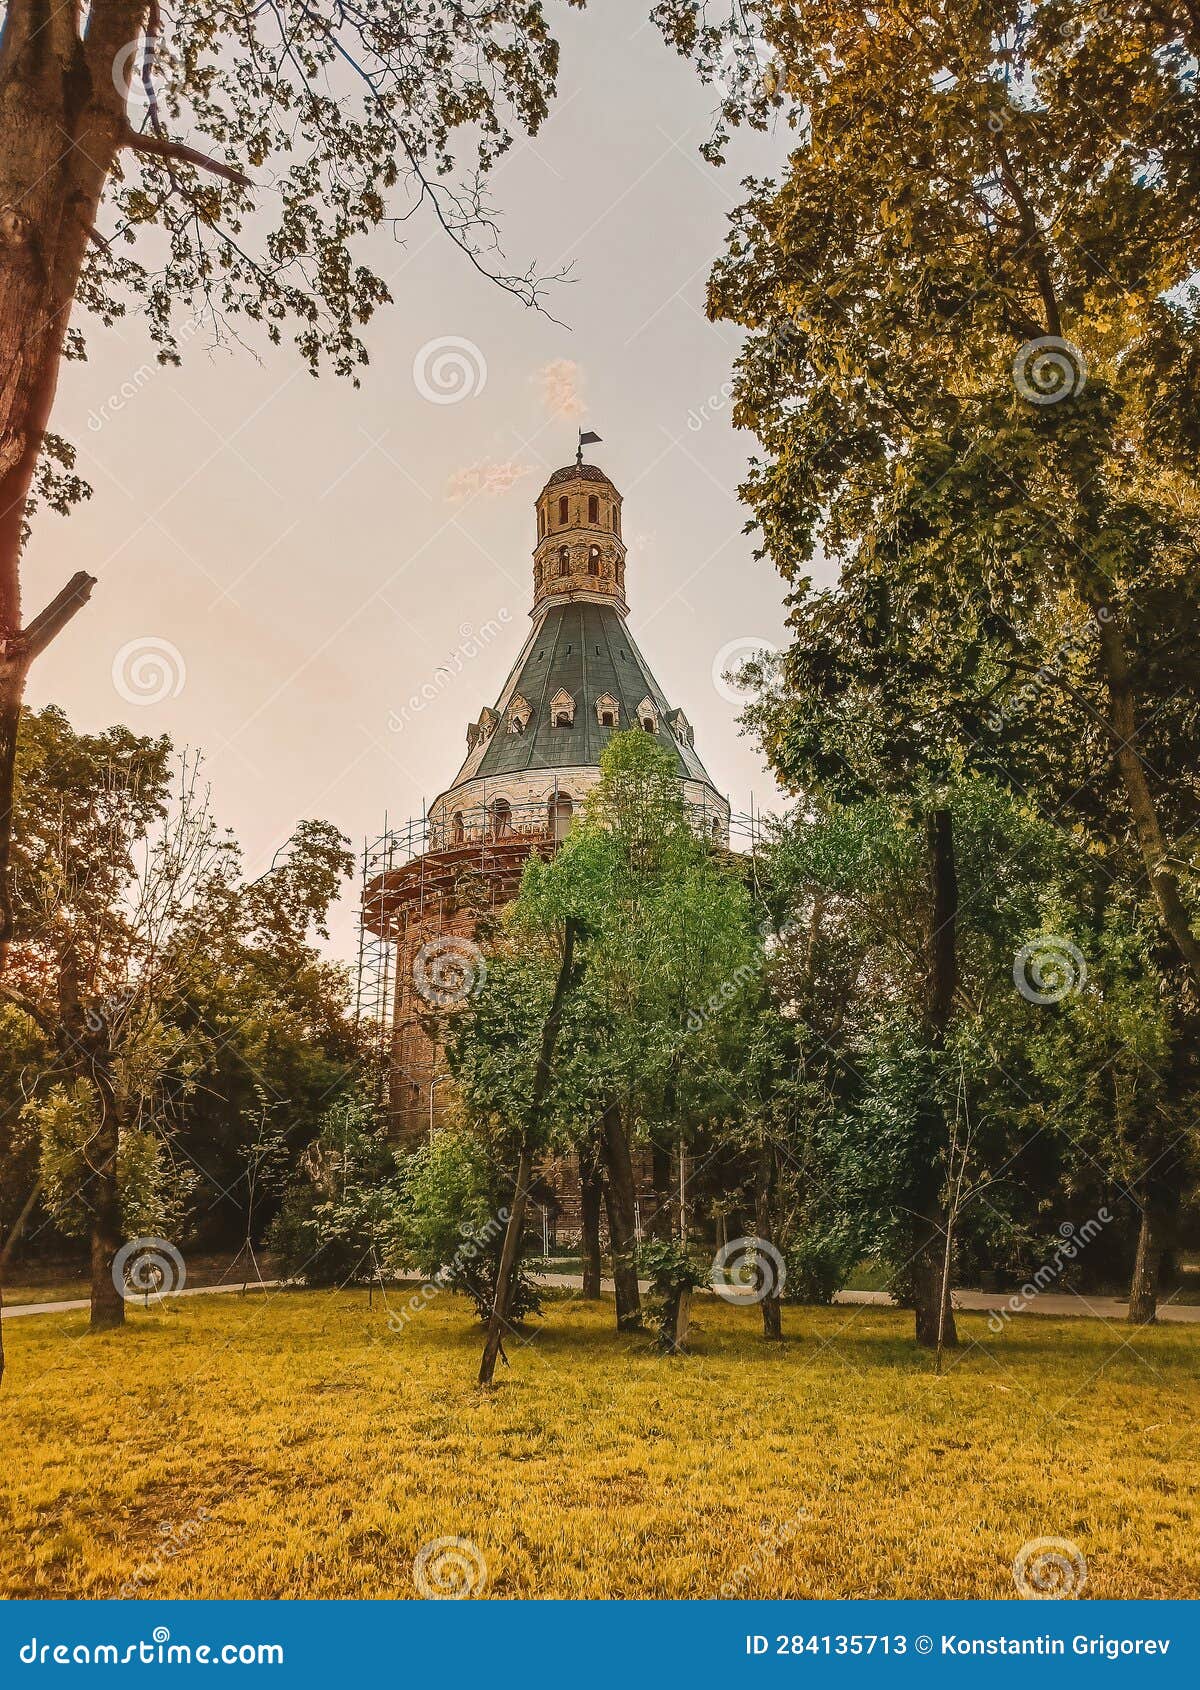 simonov monastery in moscow. landscape with tower dulo among trees